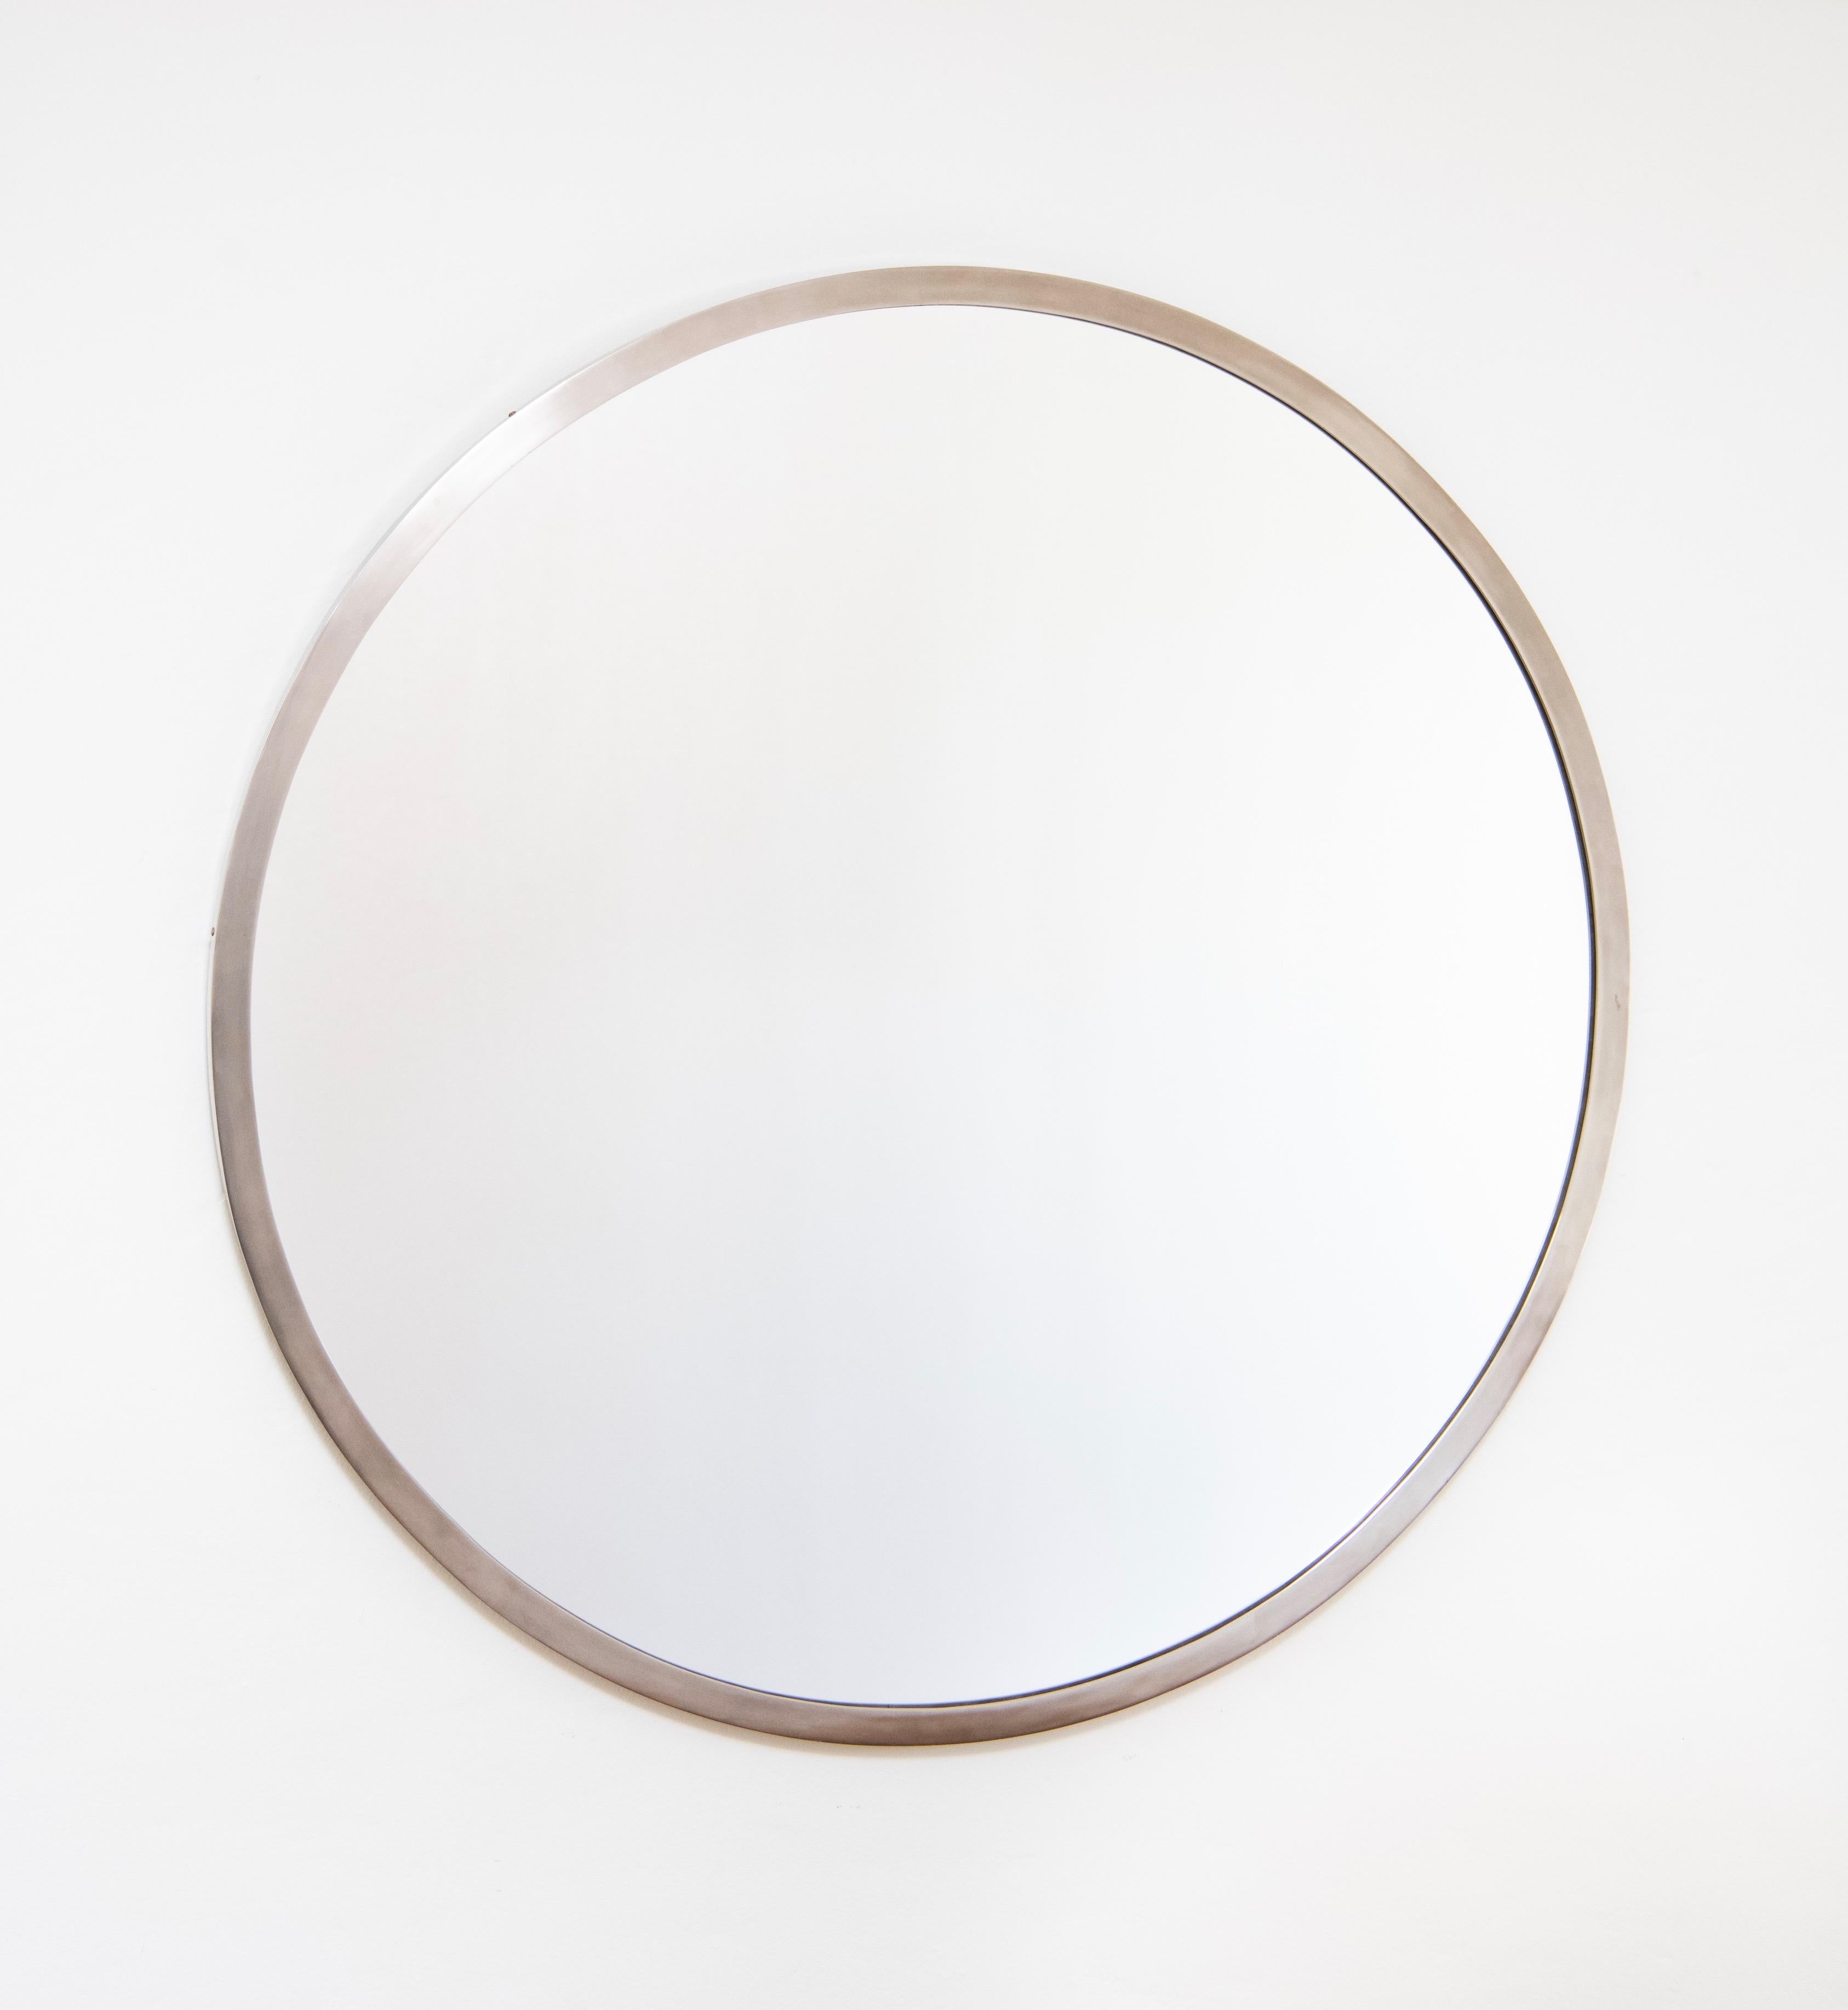 A monumental round mirror in a nickel-plated metal frame. Art deco circa 1930.